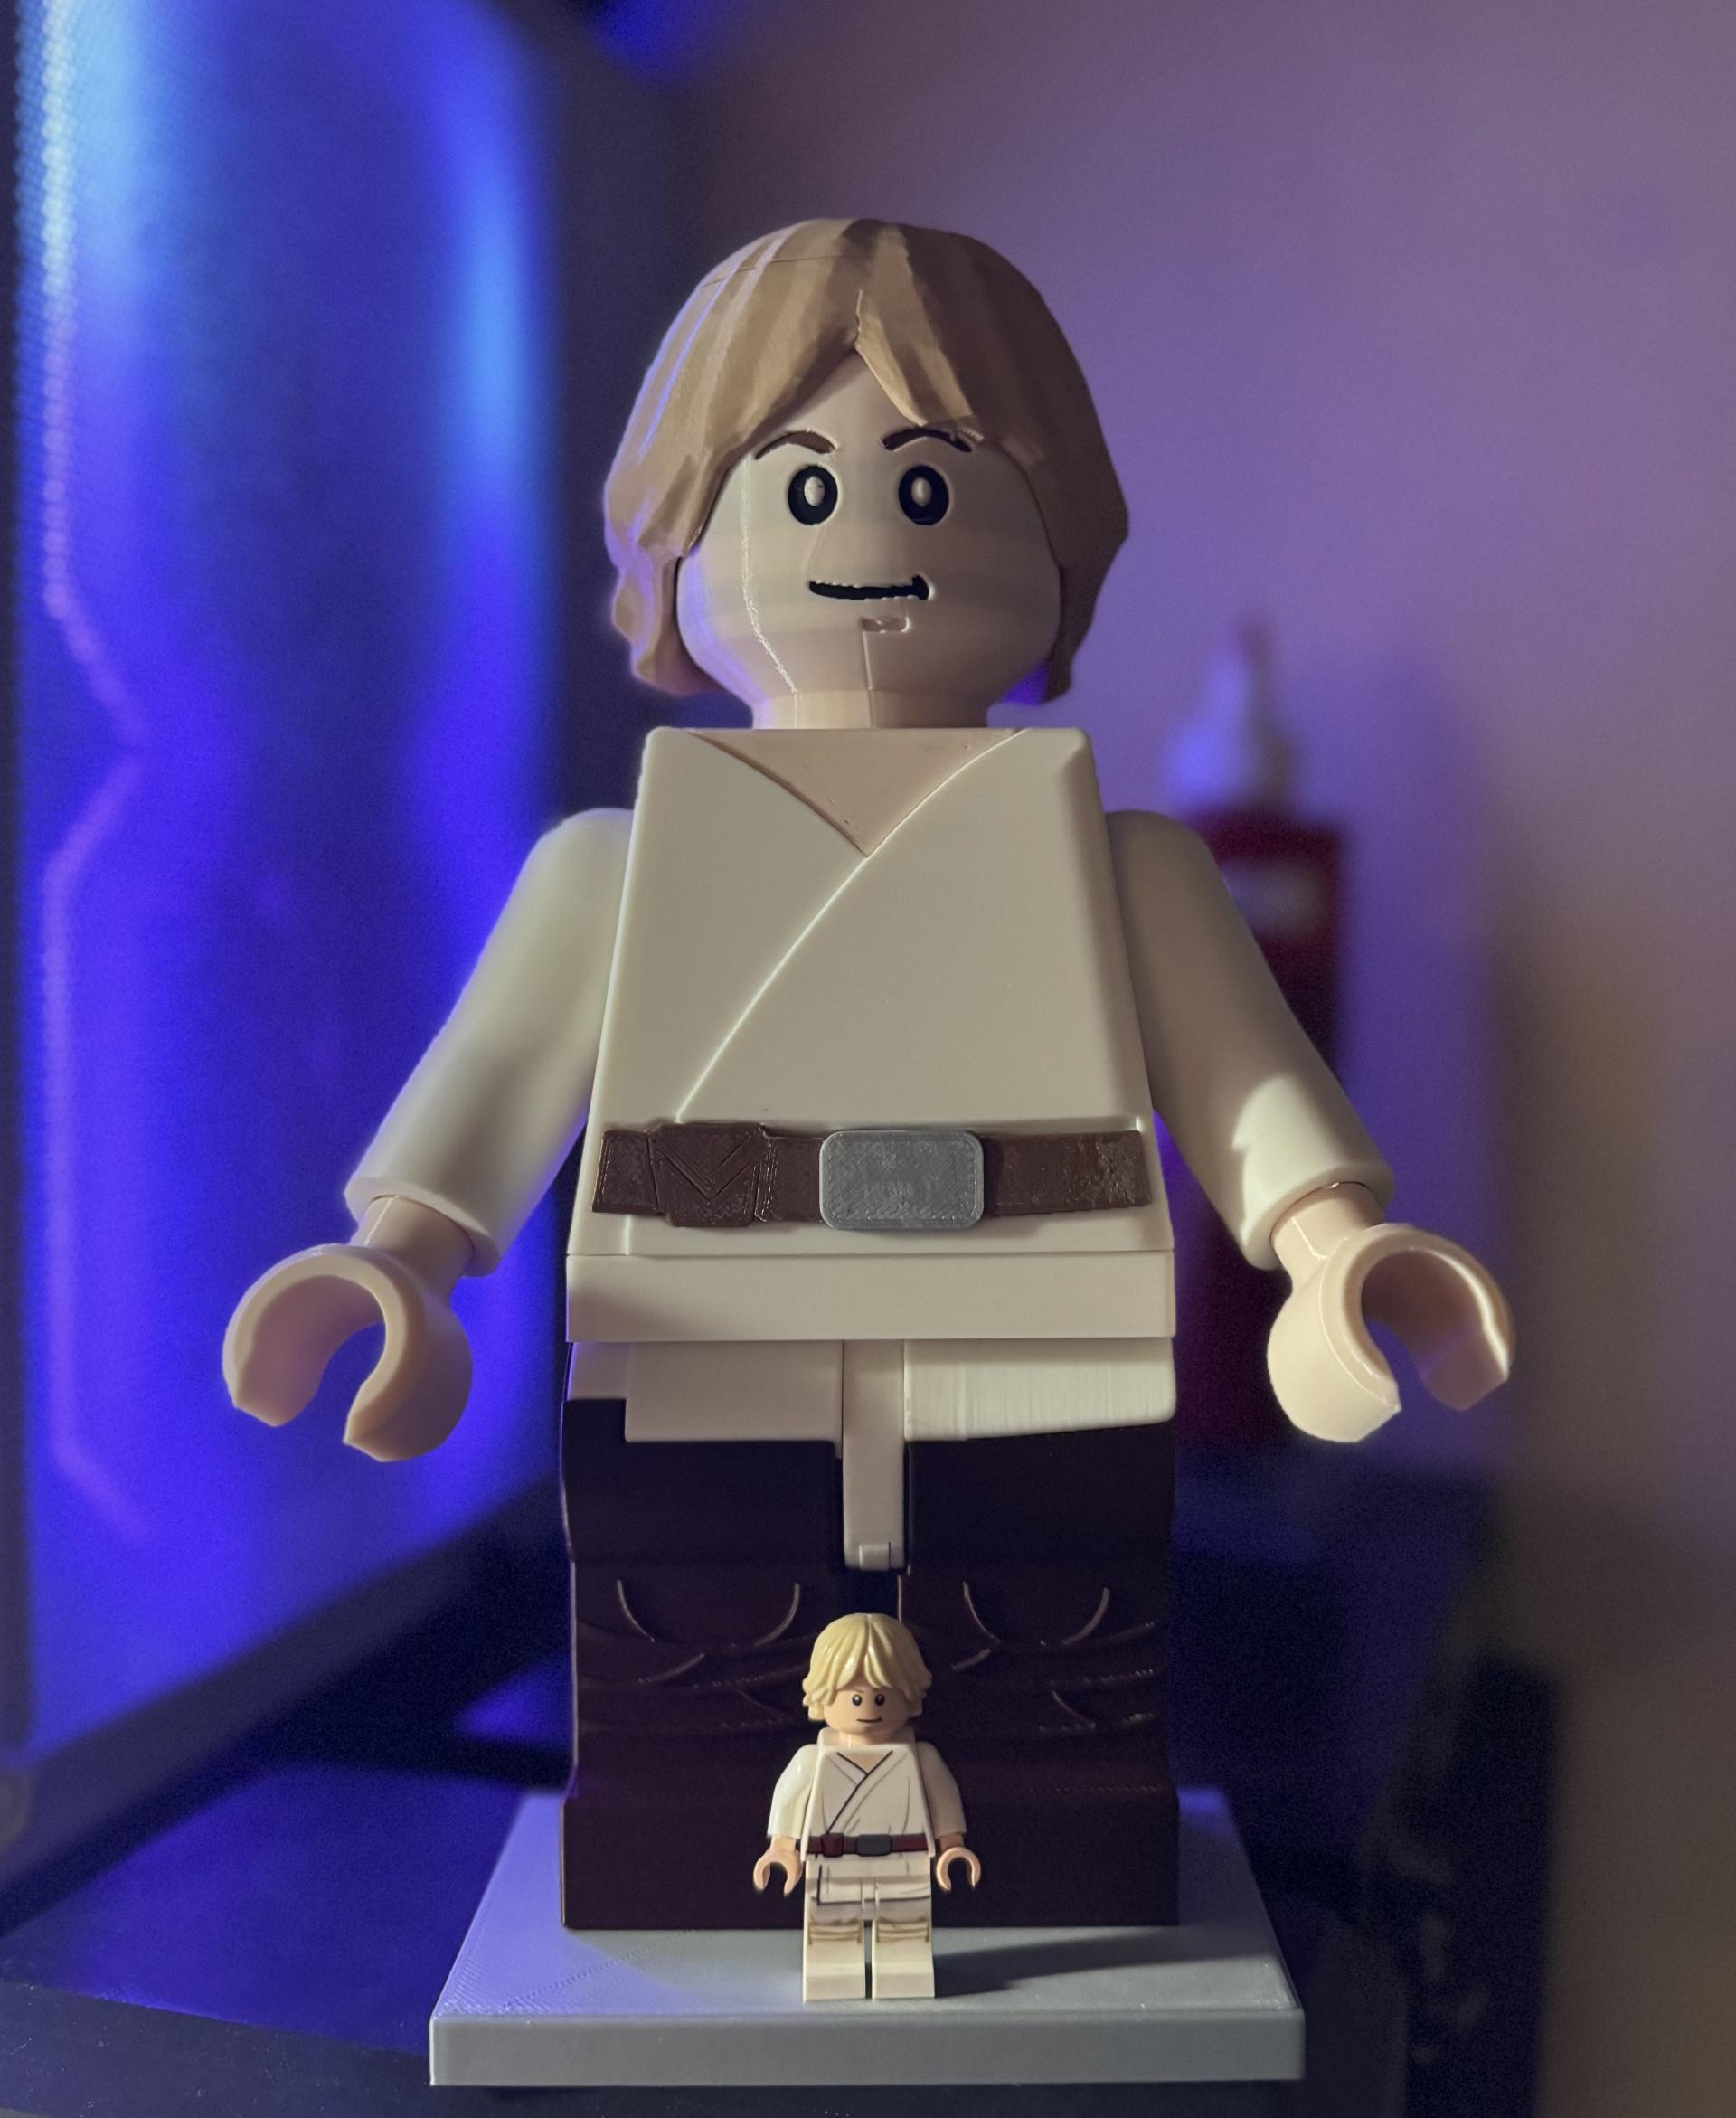 Luke Skywalker (6:1 LEGO-inspired brick figure, NO MMU/AMS, NO supports, NO glue) - The print came out great, zero issues with fitment. Had some issues with the head and filament swap, might re-print later.

Printed @ 0.16
Wall loop 4
30% infill - 3d model